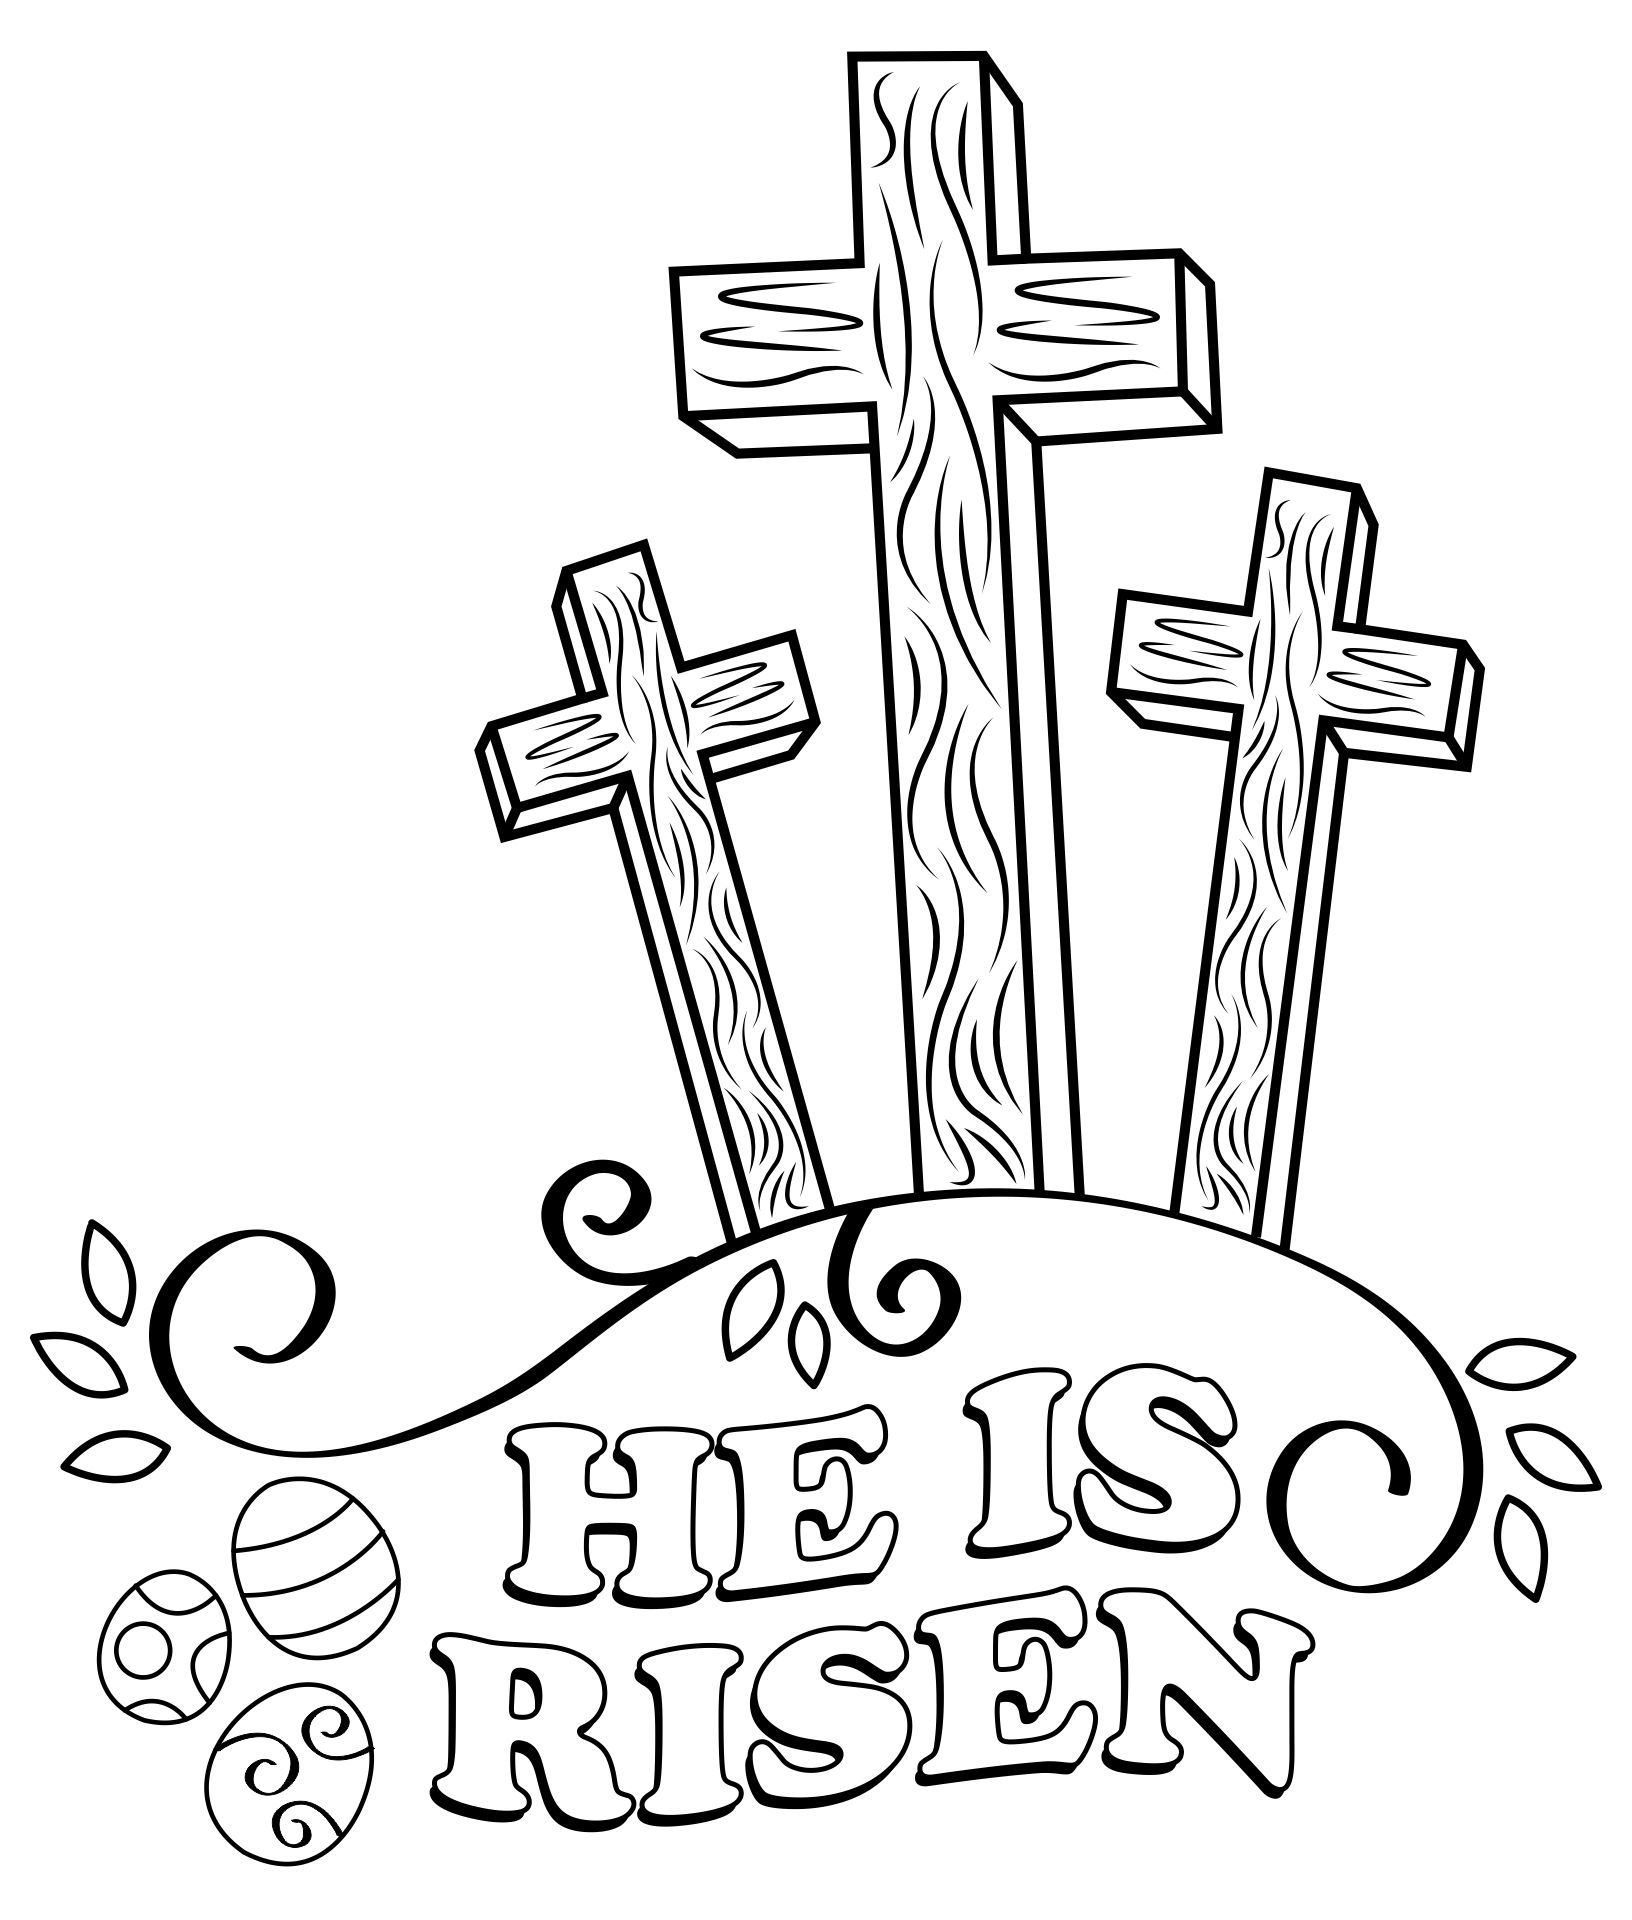 7 Best Images of Free Printable Religious Easter Crafts - Christian ...